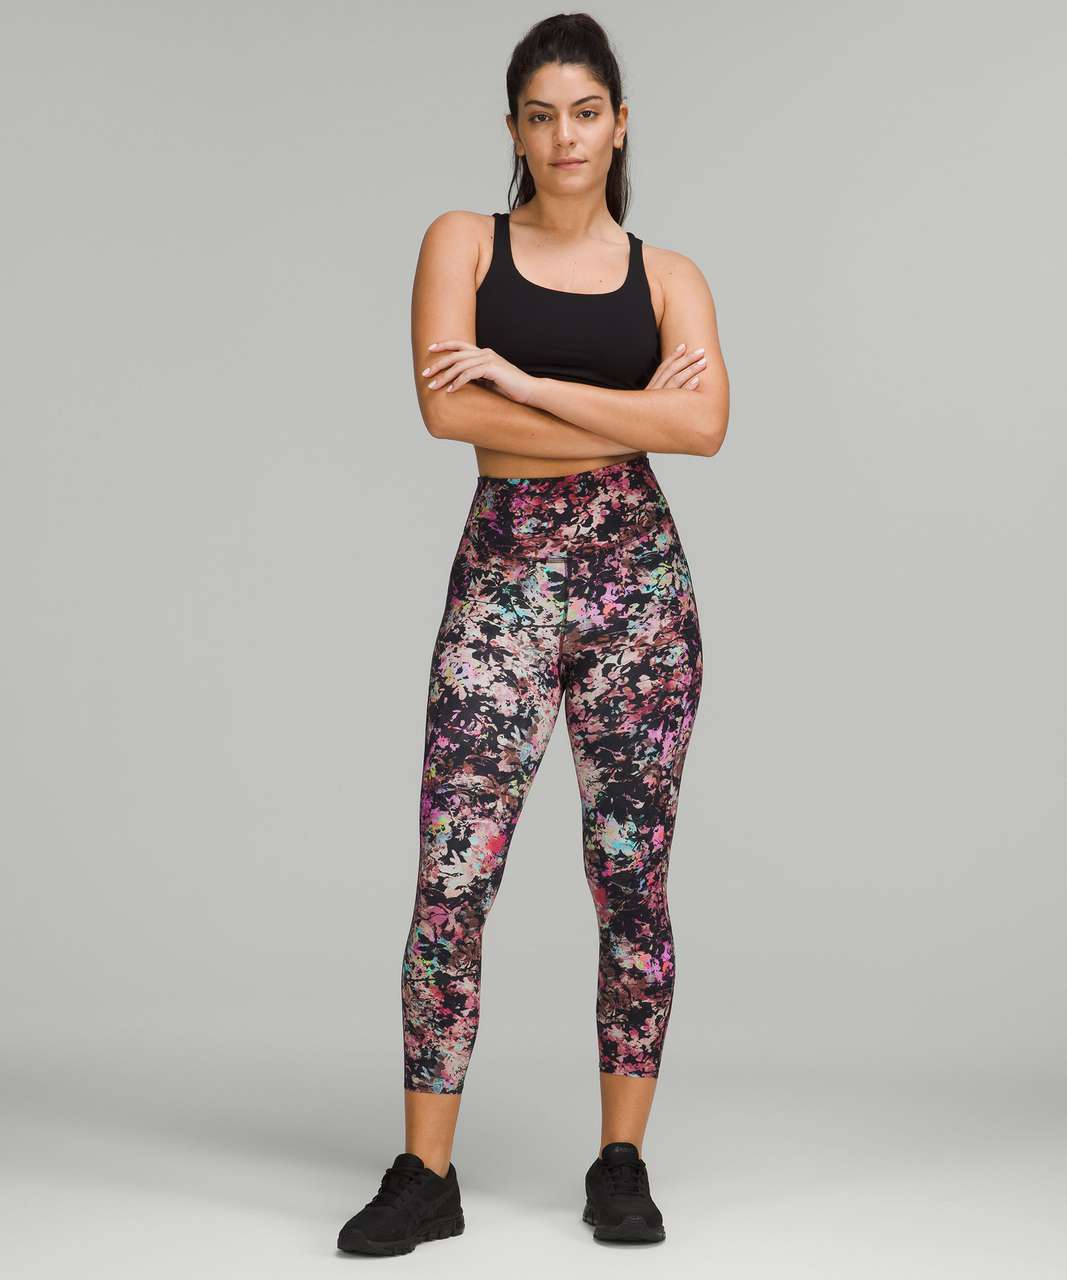 Lululemon Base Pace High-Rise Crop 23" - Stencil Blossom Red Multi